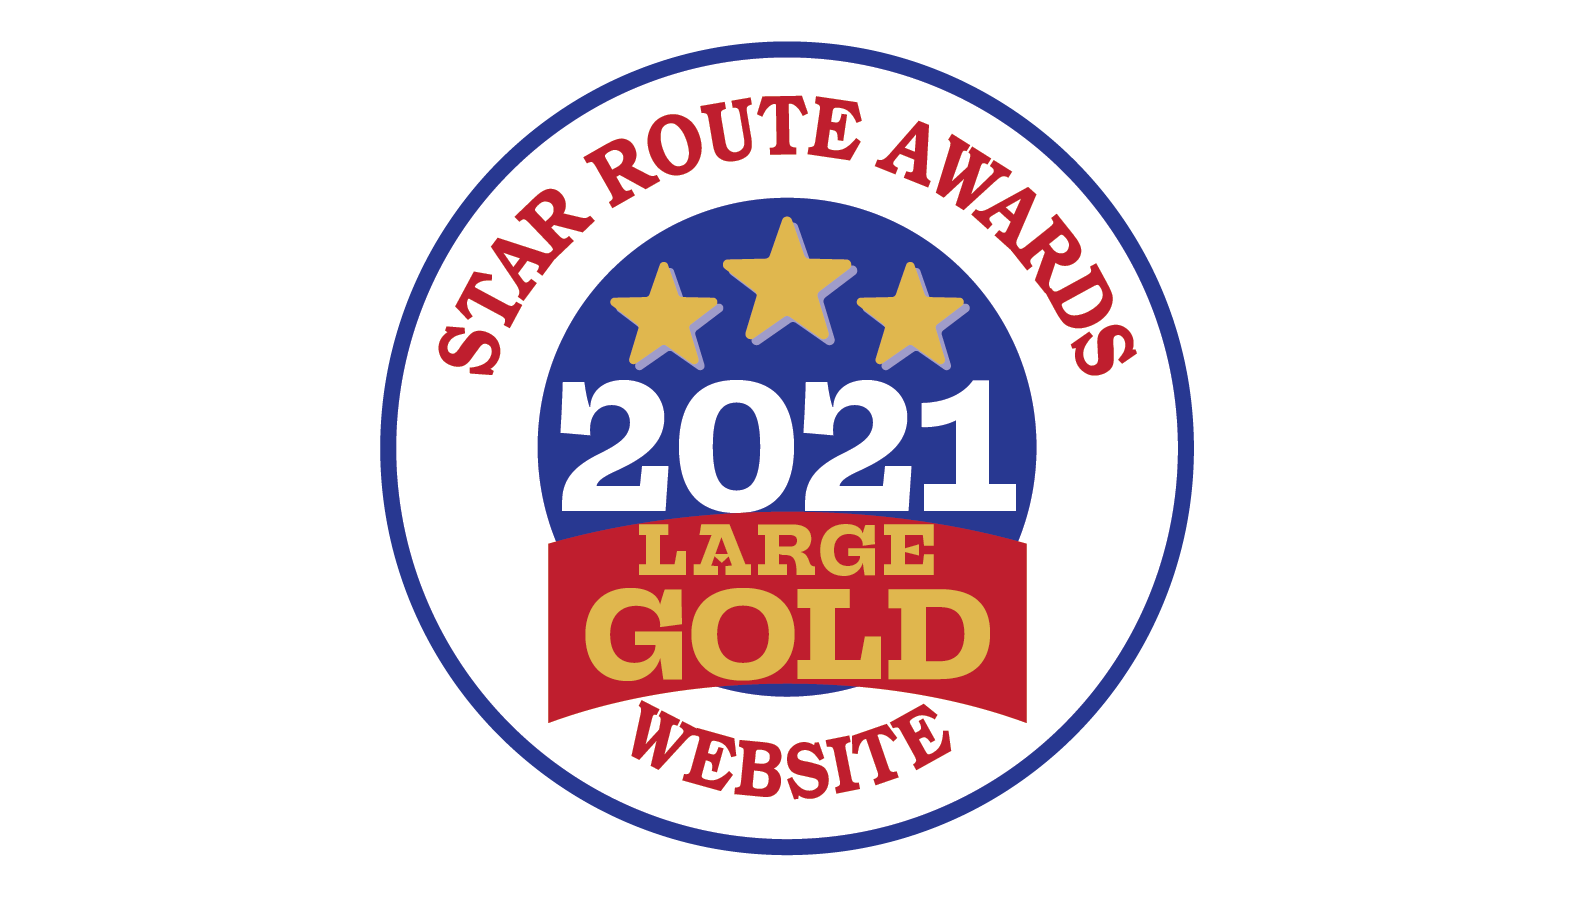 Star Route Awards for GMCSC